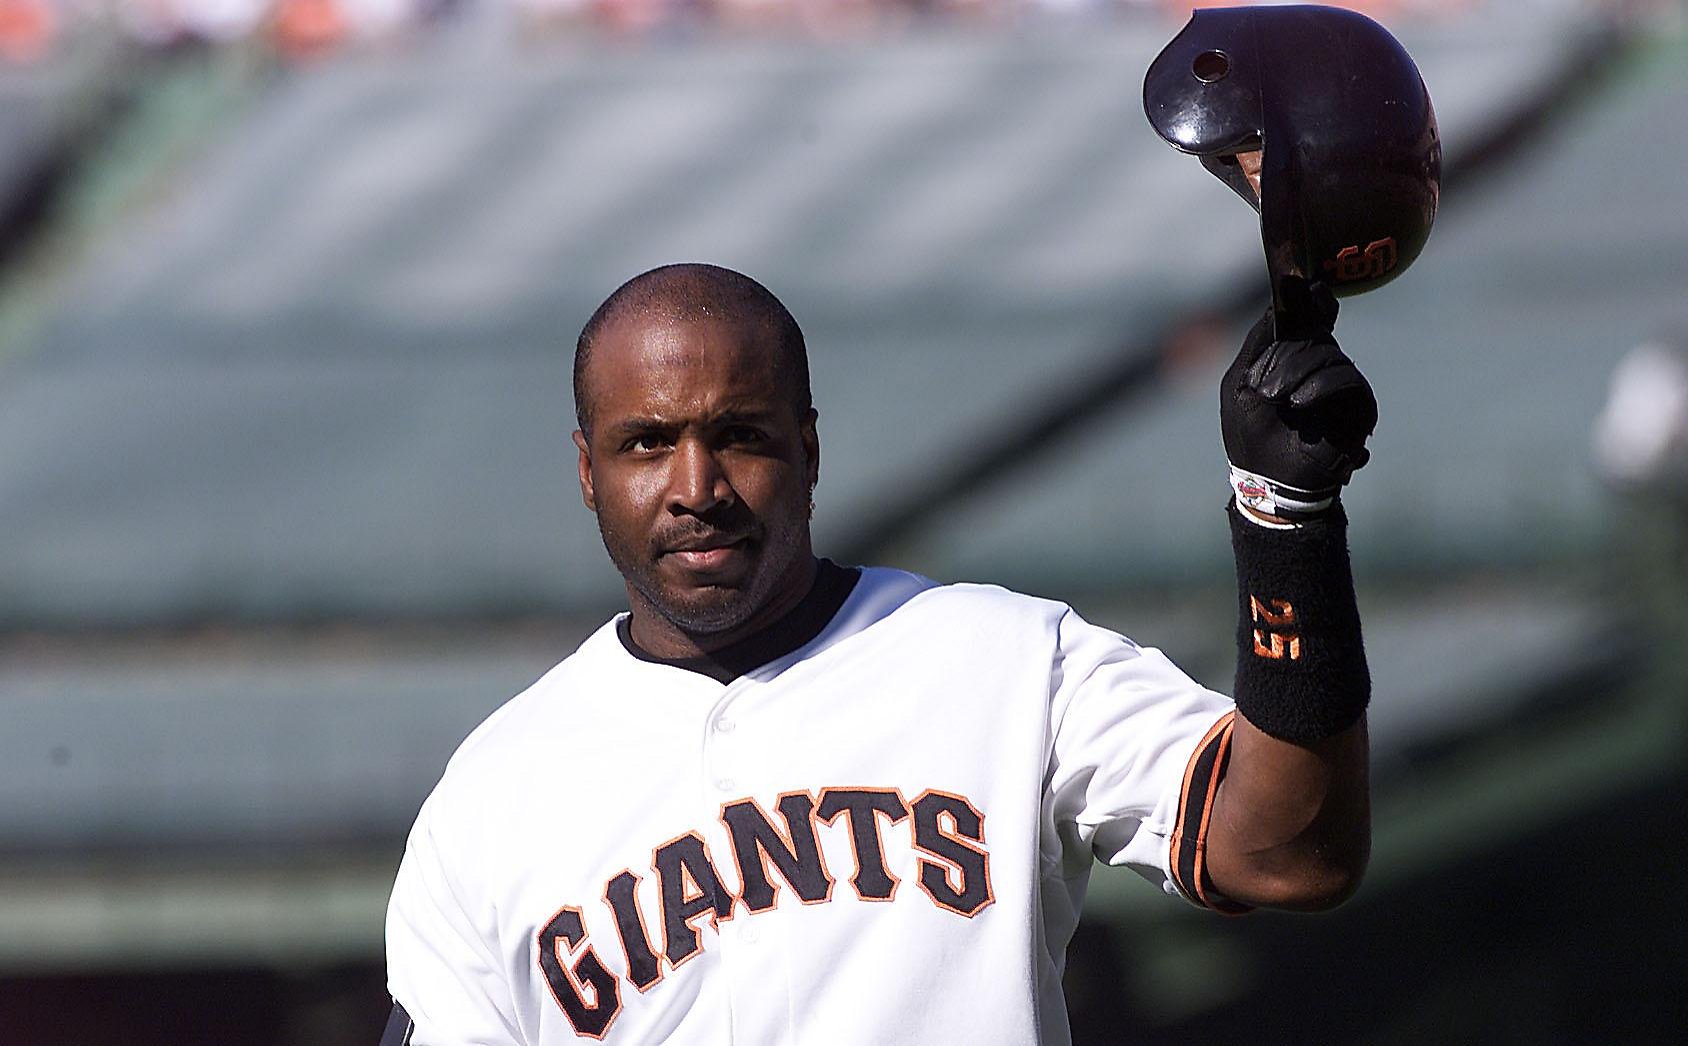 Putting Bonds in Cooperstown would give Hall a shot in the arm